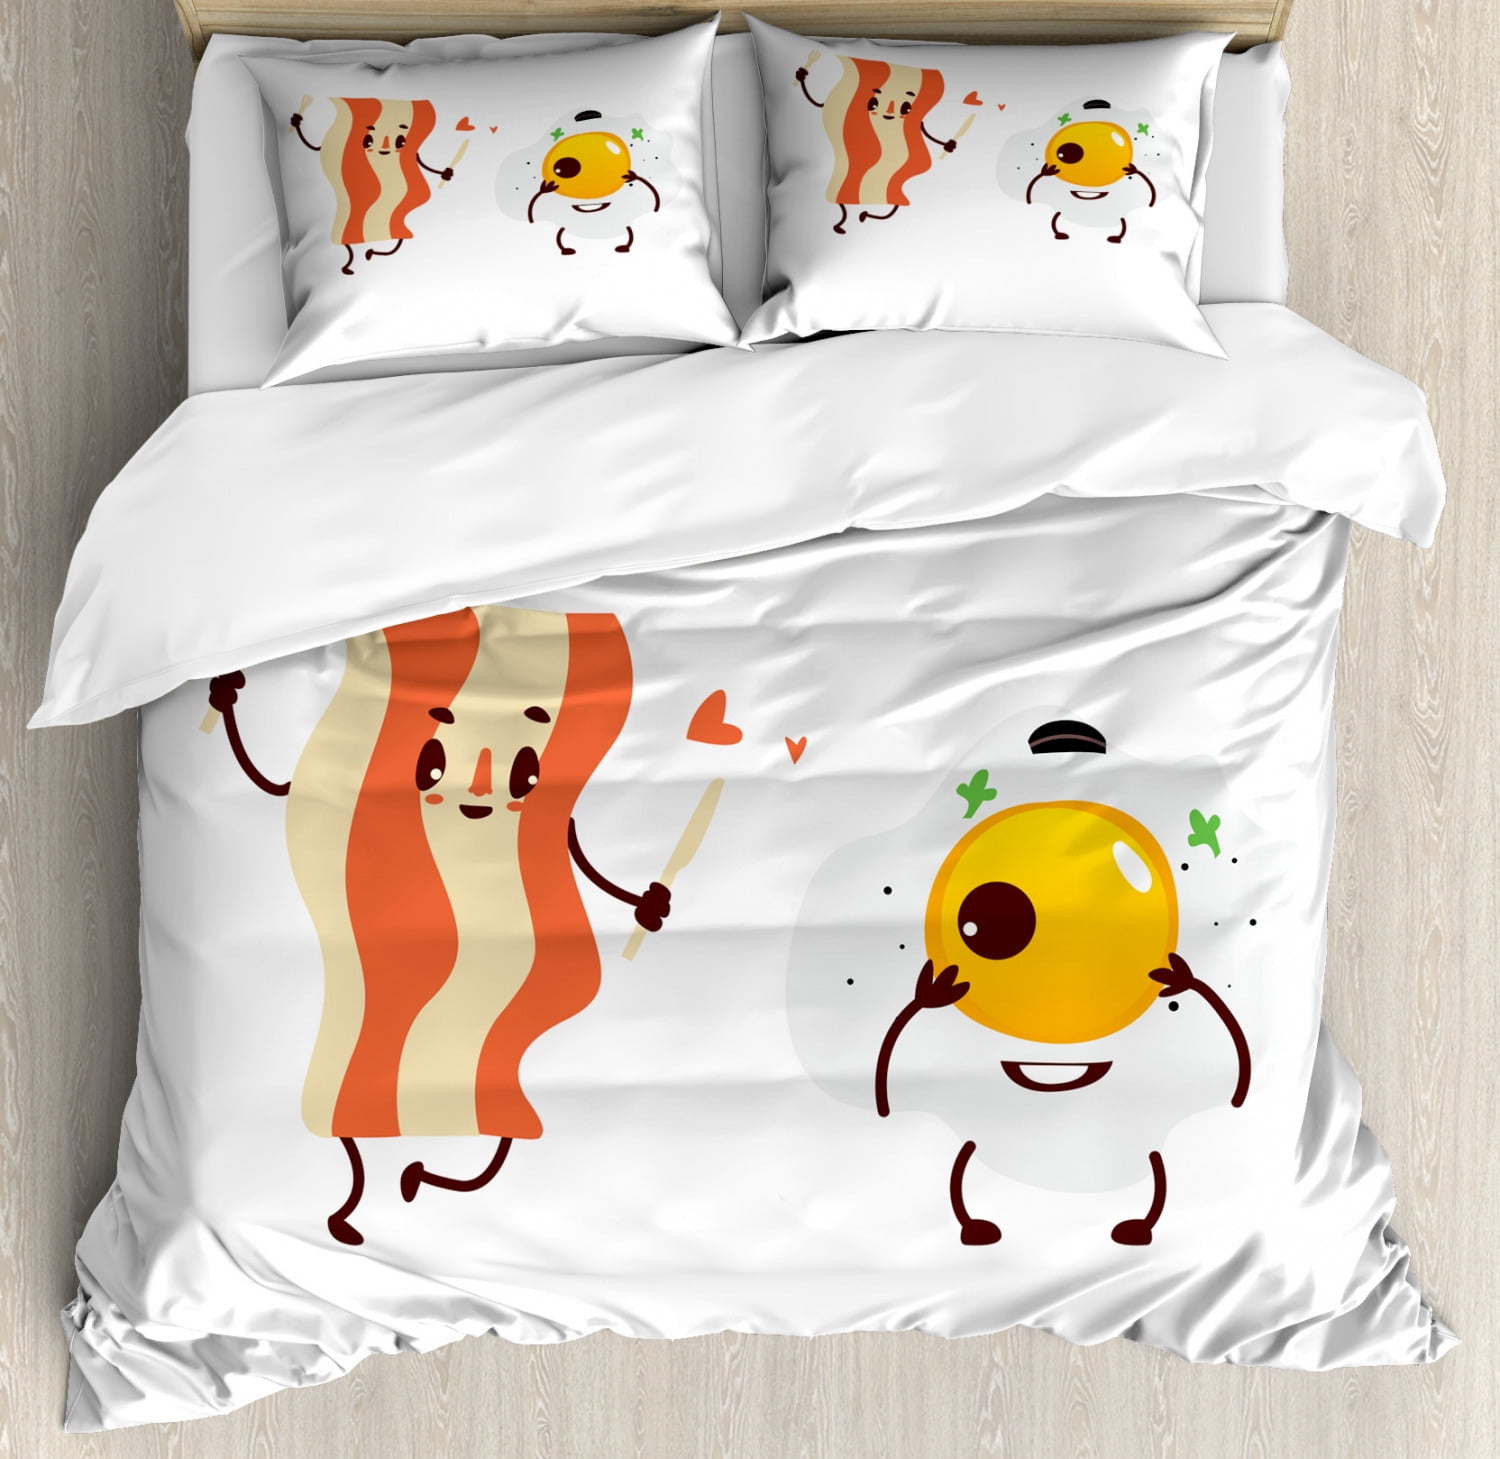 Bacon Duvet Cover Set King Size Funny Cartoon Characters Of Side